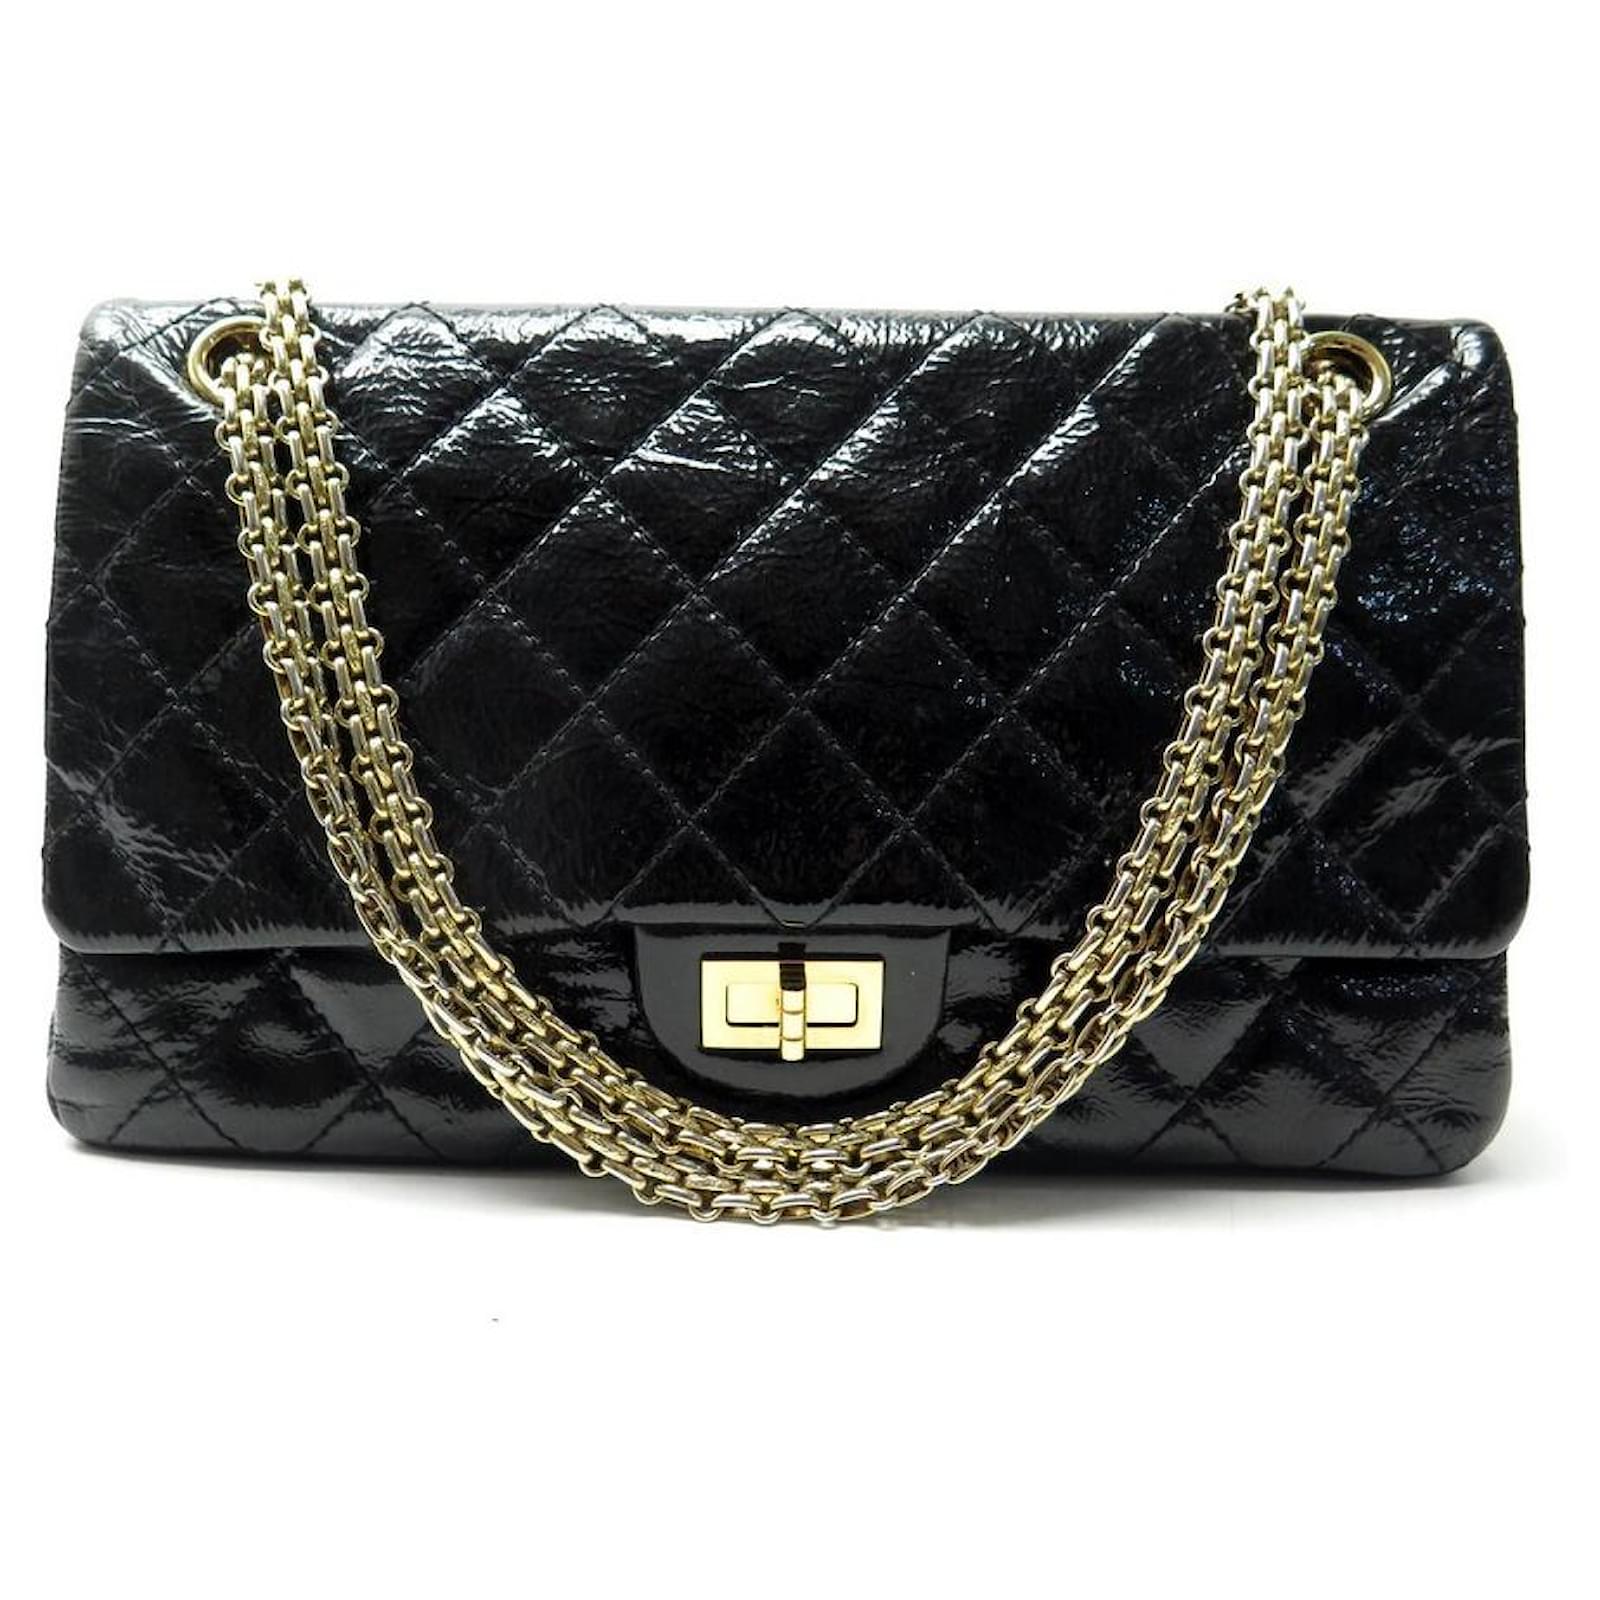 Handbags Chanel Chanel Large Handbag 2.55 Jumbo in Black Quilted Patent Leather Hand Bag